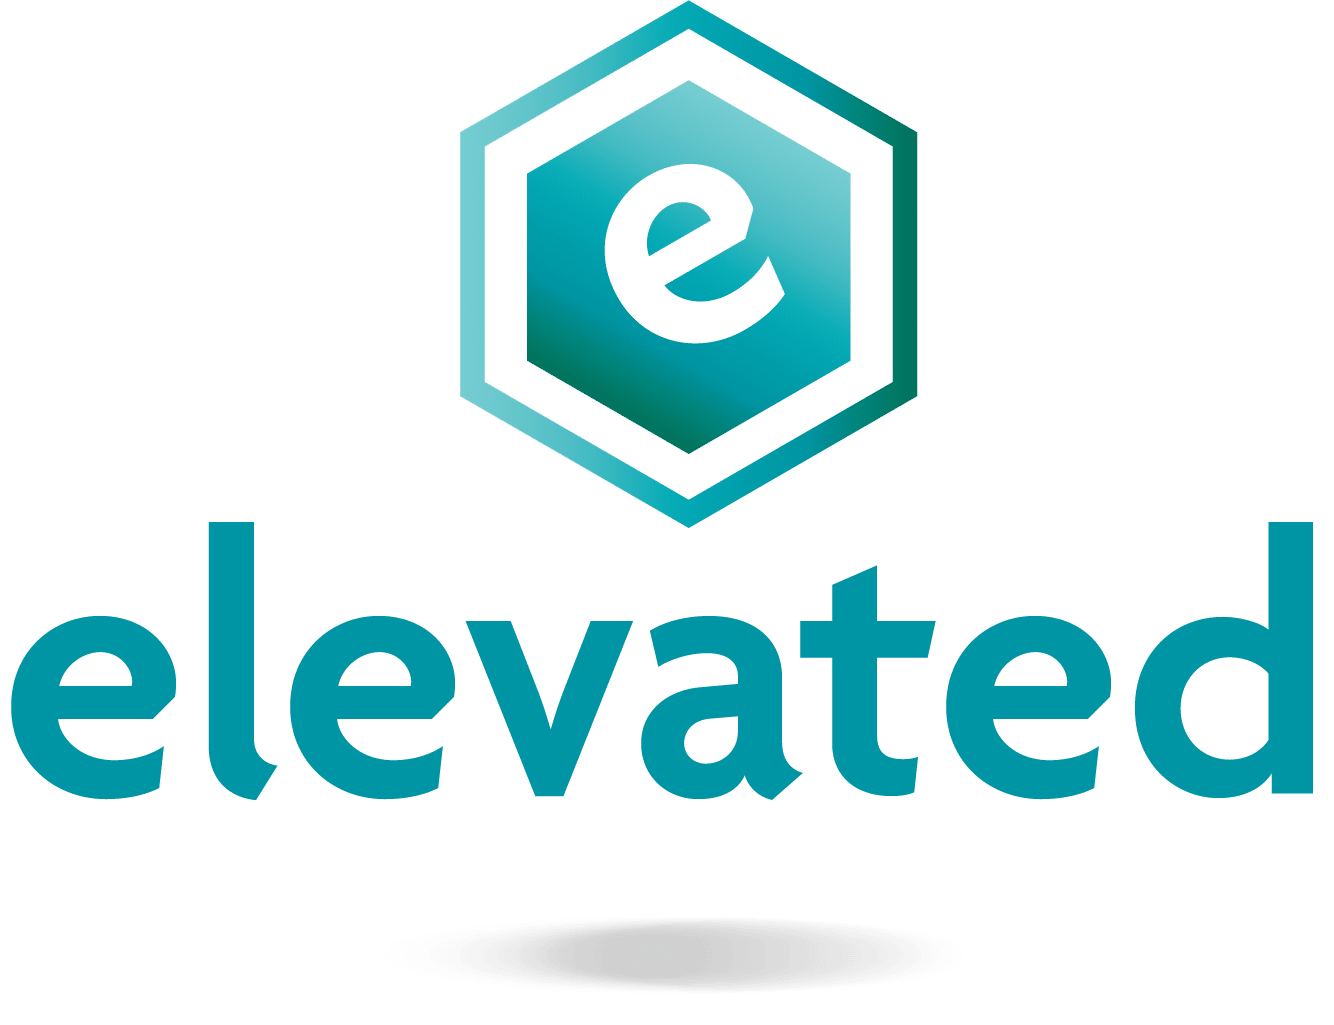 Elevated Labs